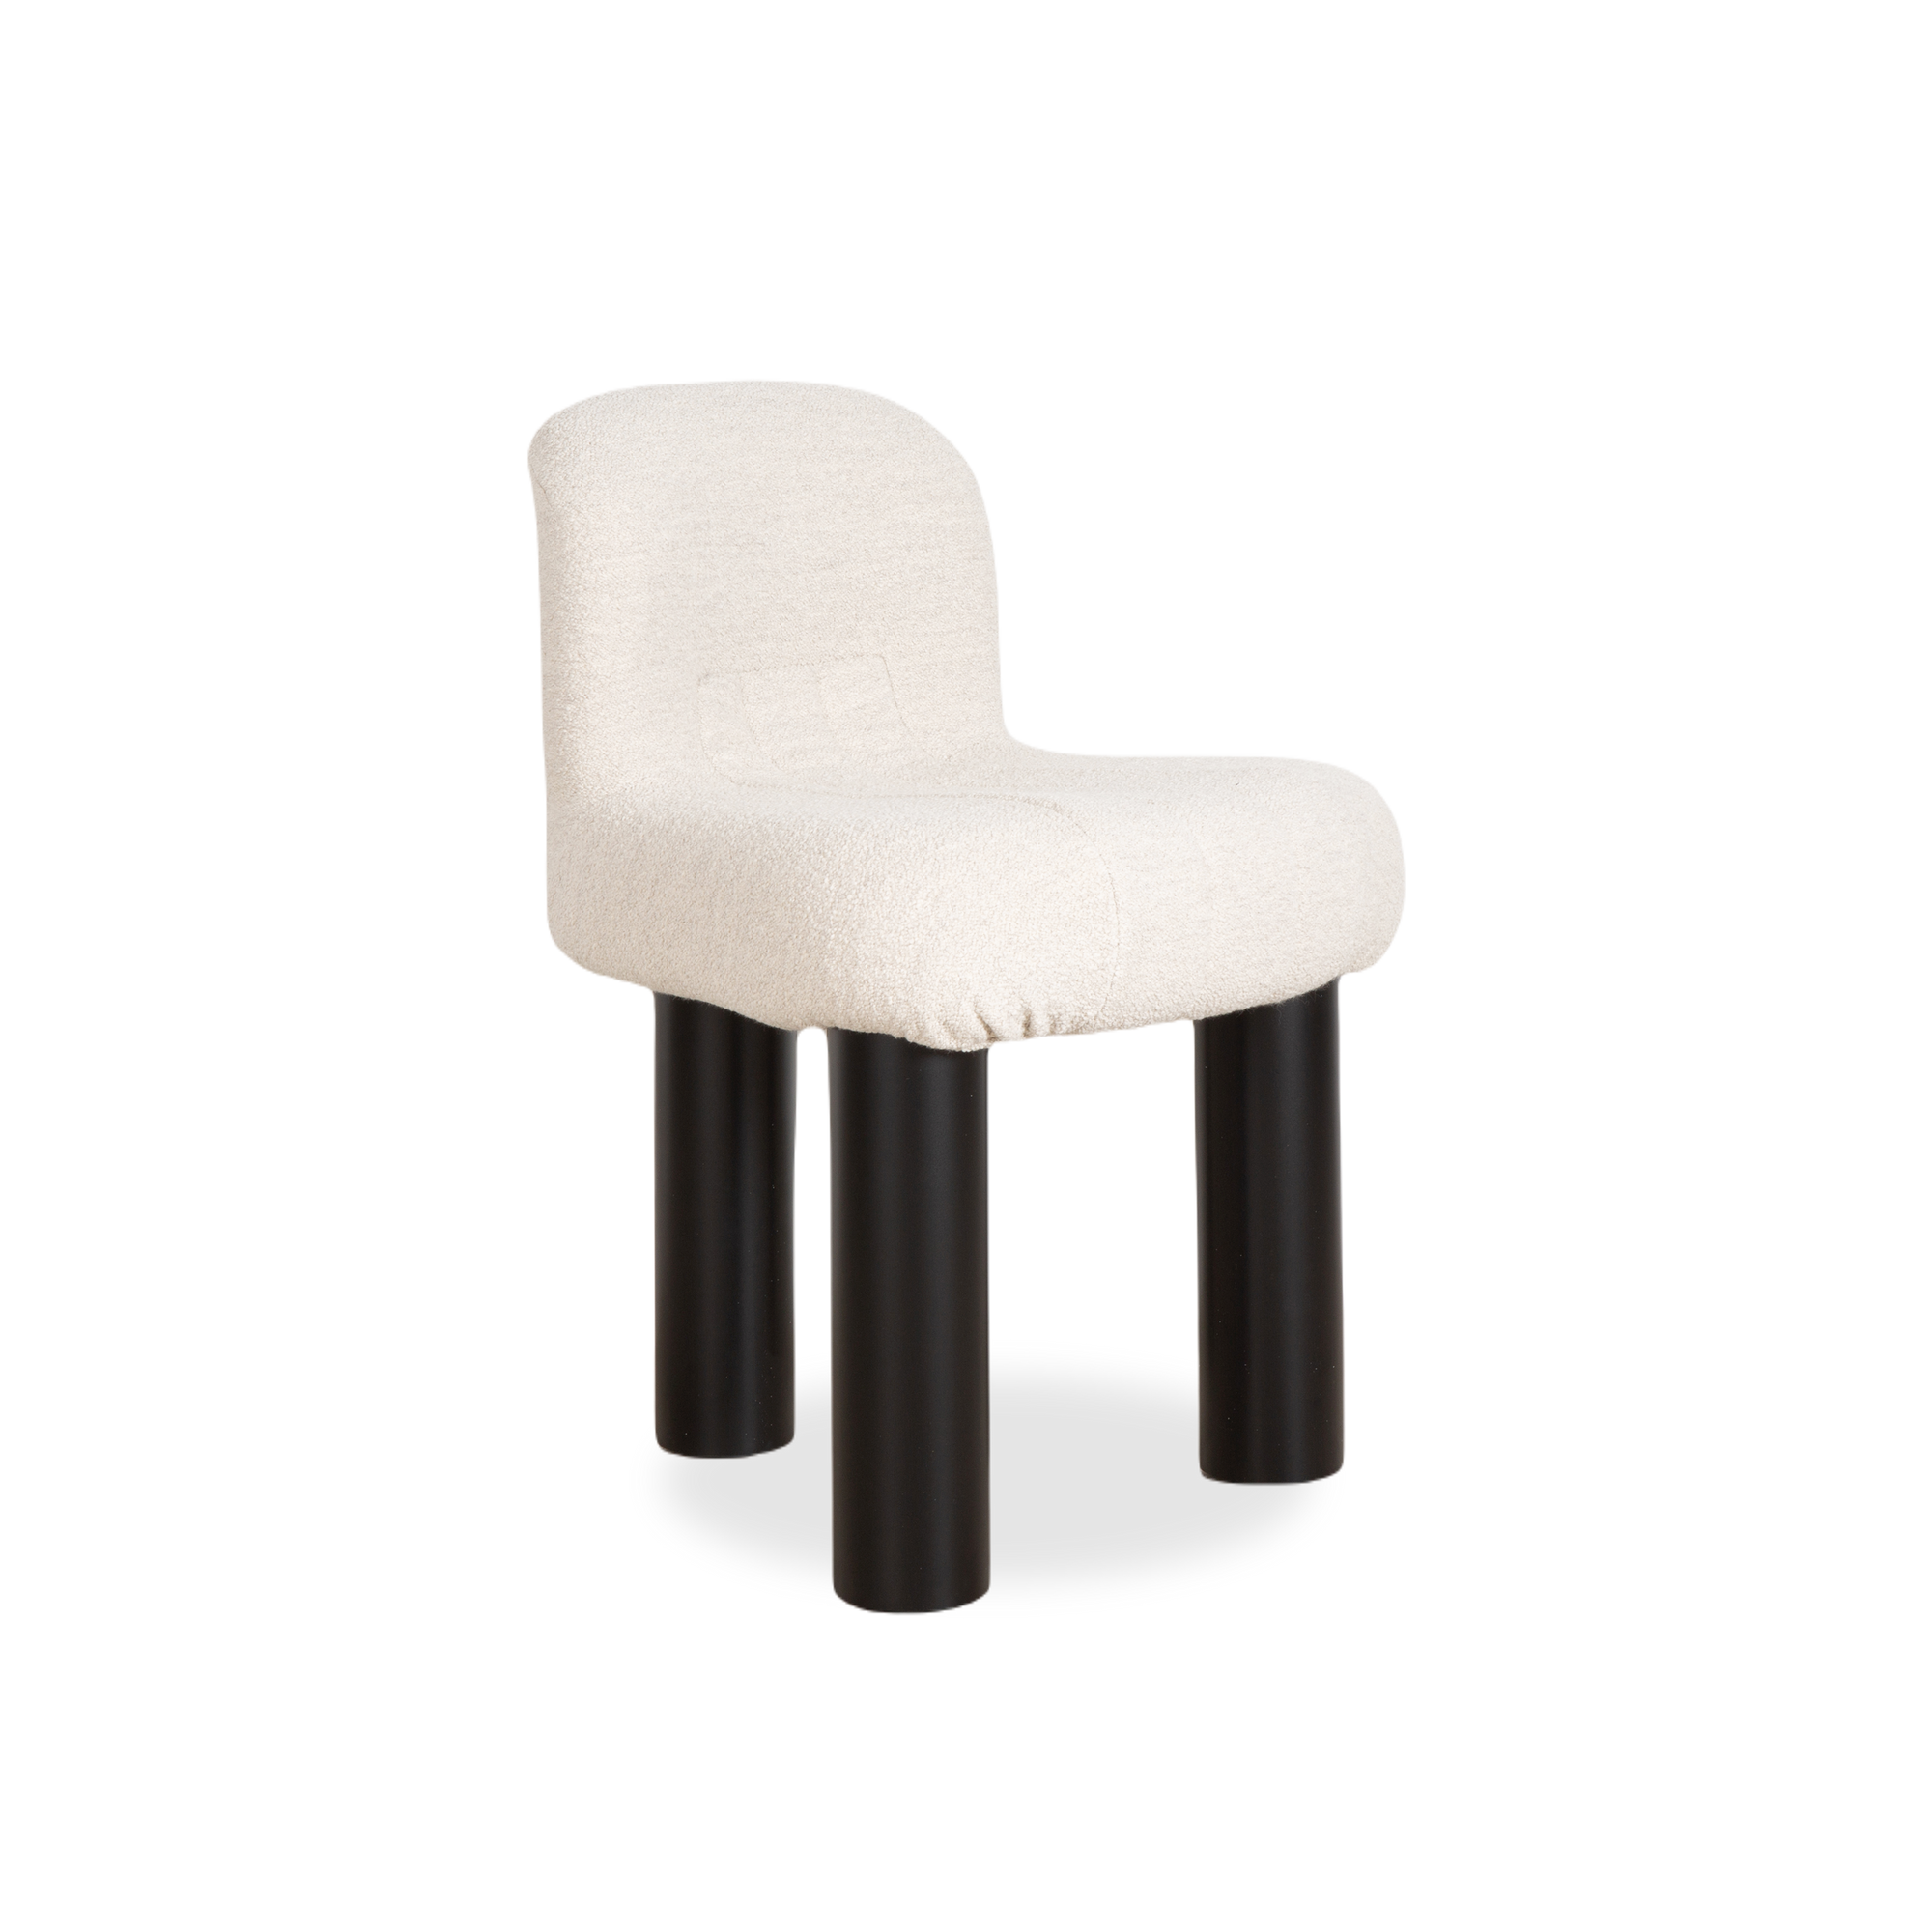 Challenging traditional seating norms with its playful cylindrical forms and tailored curves,  Cini Boeri's Botolo Chair stands as a visionary icon.